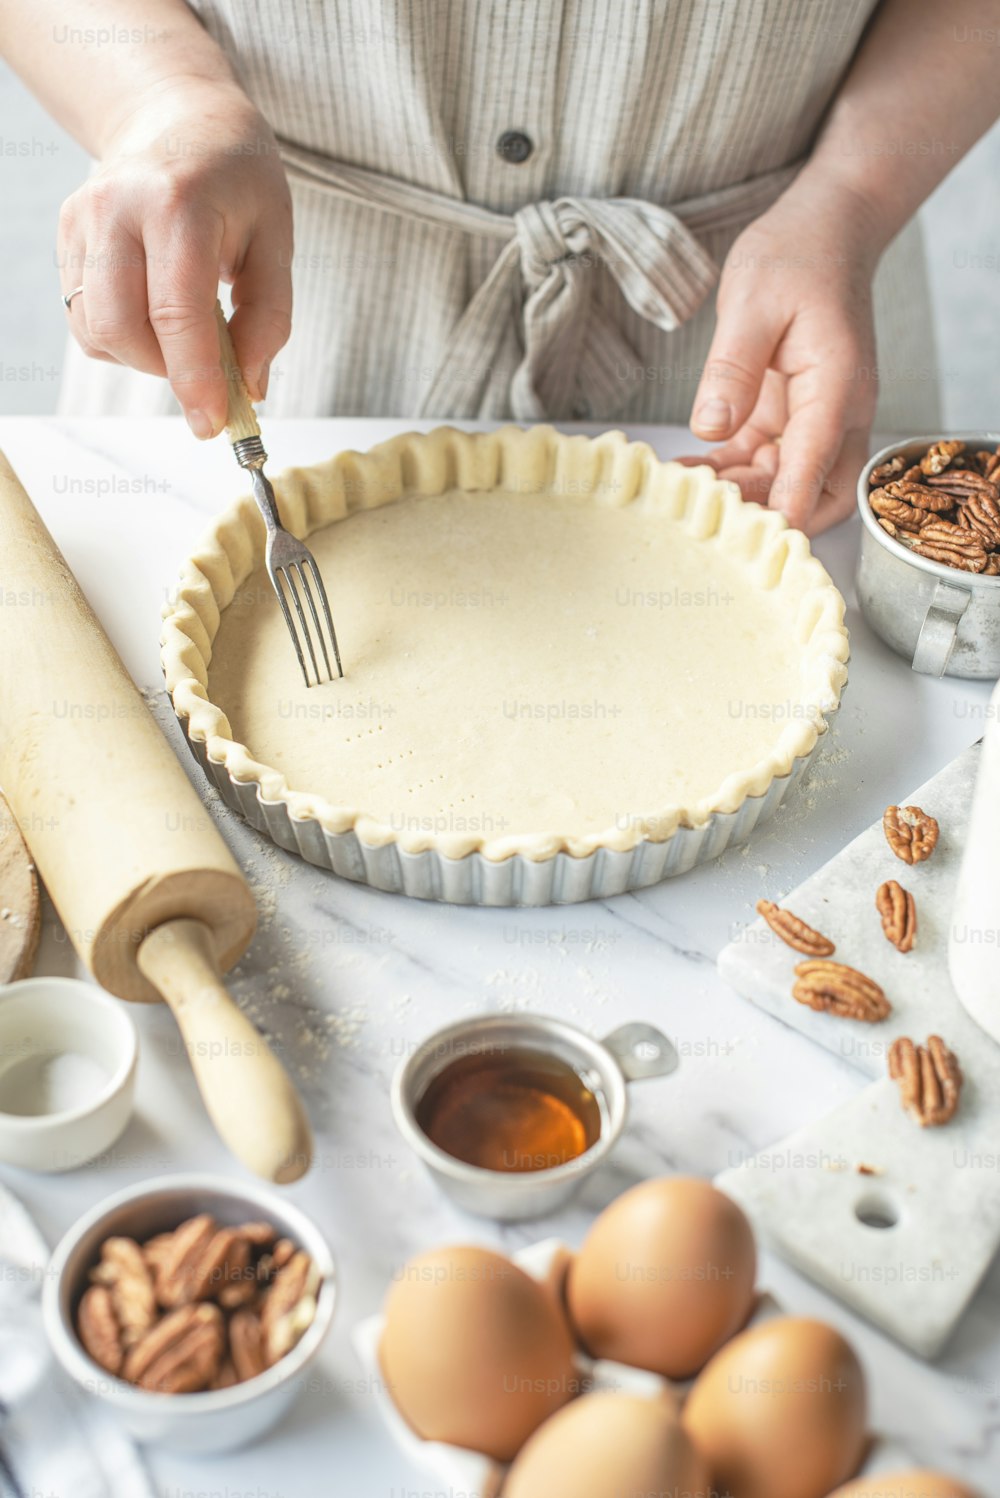 a person cutting a pie crust with a knife and fork